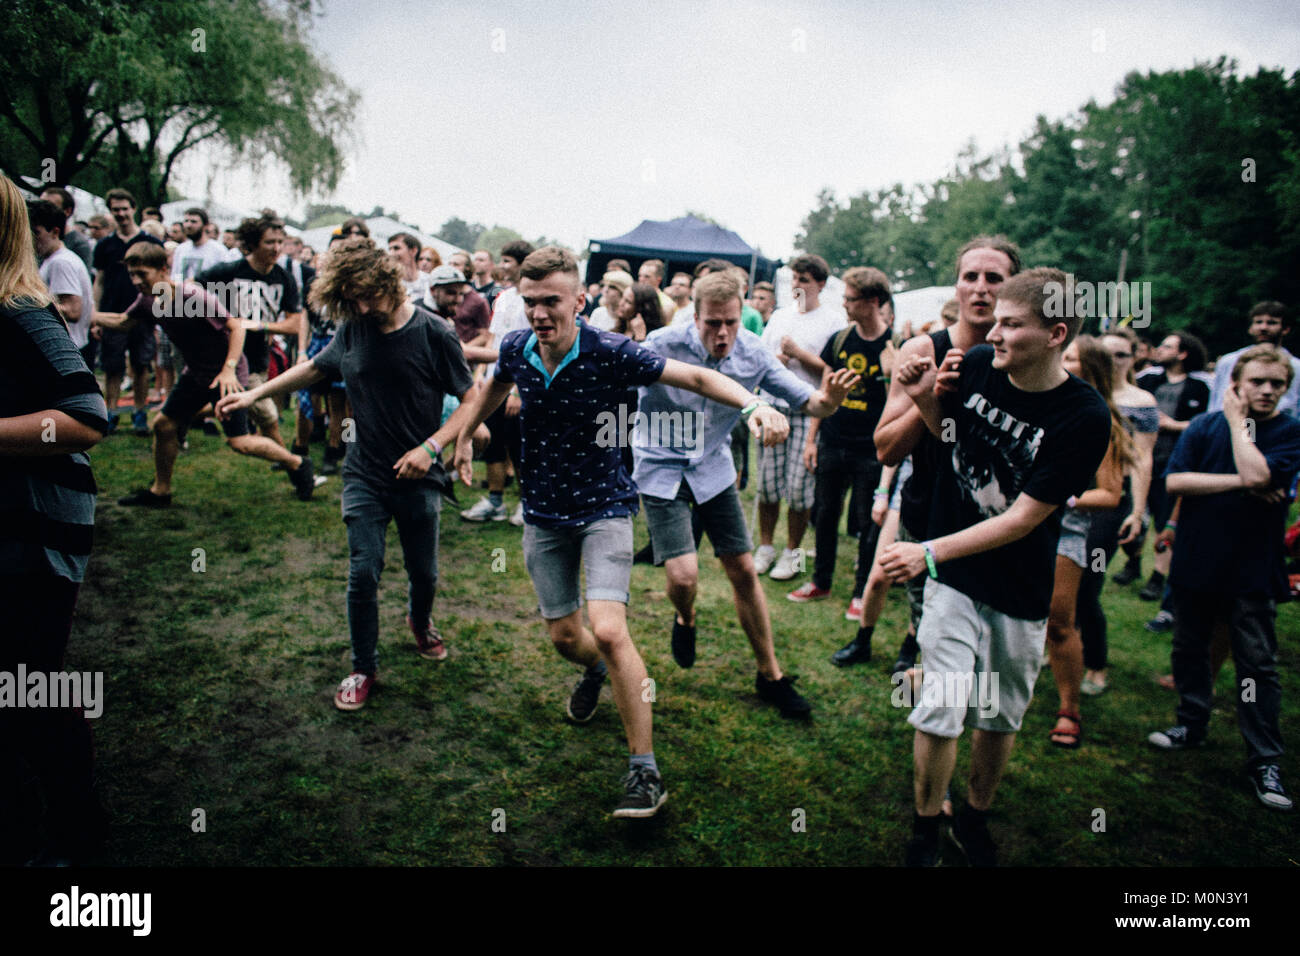 A group of Polish punk and music fans have a great and energetic time dancing around like crazy in front of the stage when the American punk band Cerebral Ballzy gave concert at the Off Festival 2014 in Poland, 01/08 2014. Stock Photo